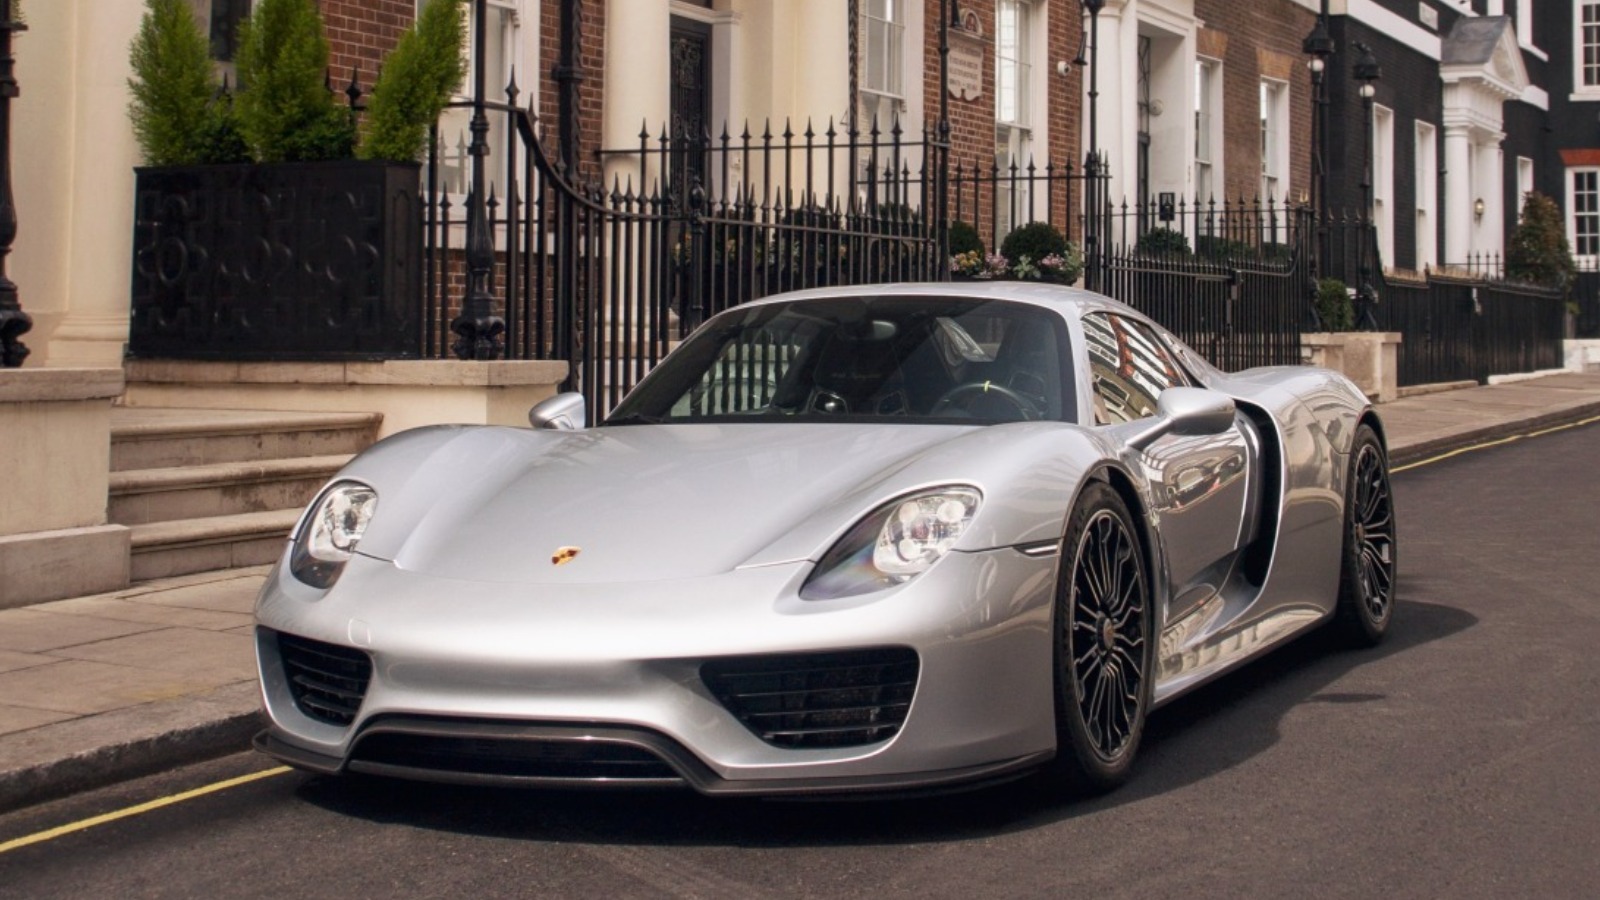 The Reason Why Porsche Discontinued The Legendary 918 Spyder